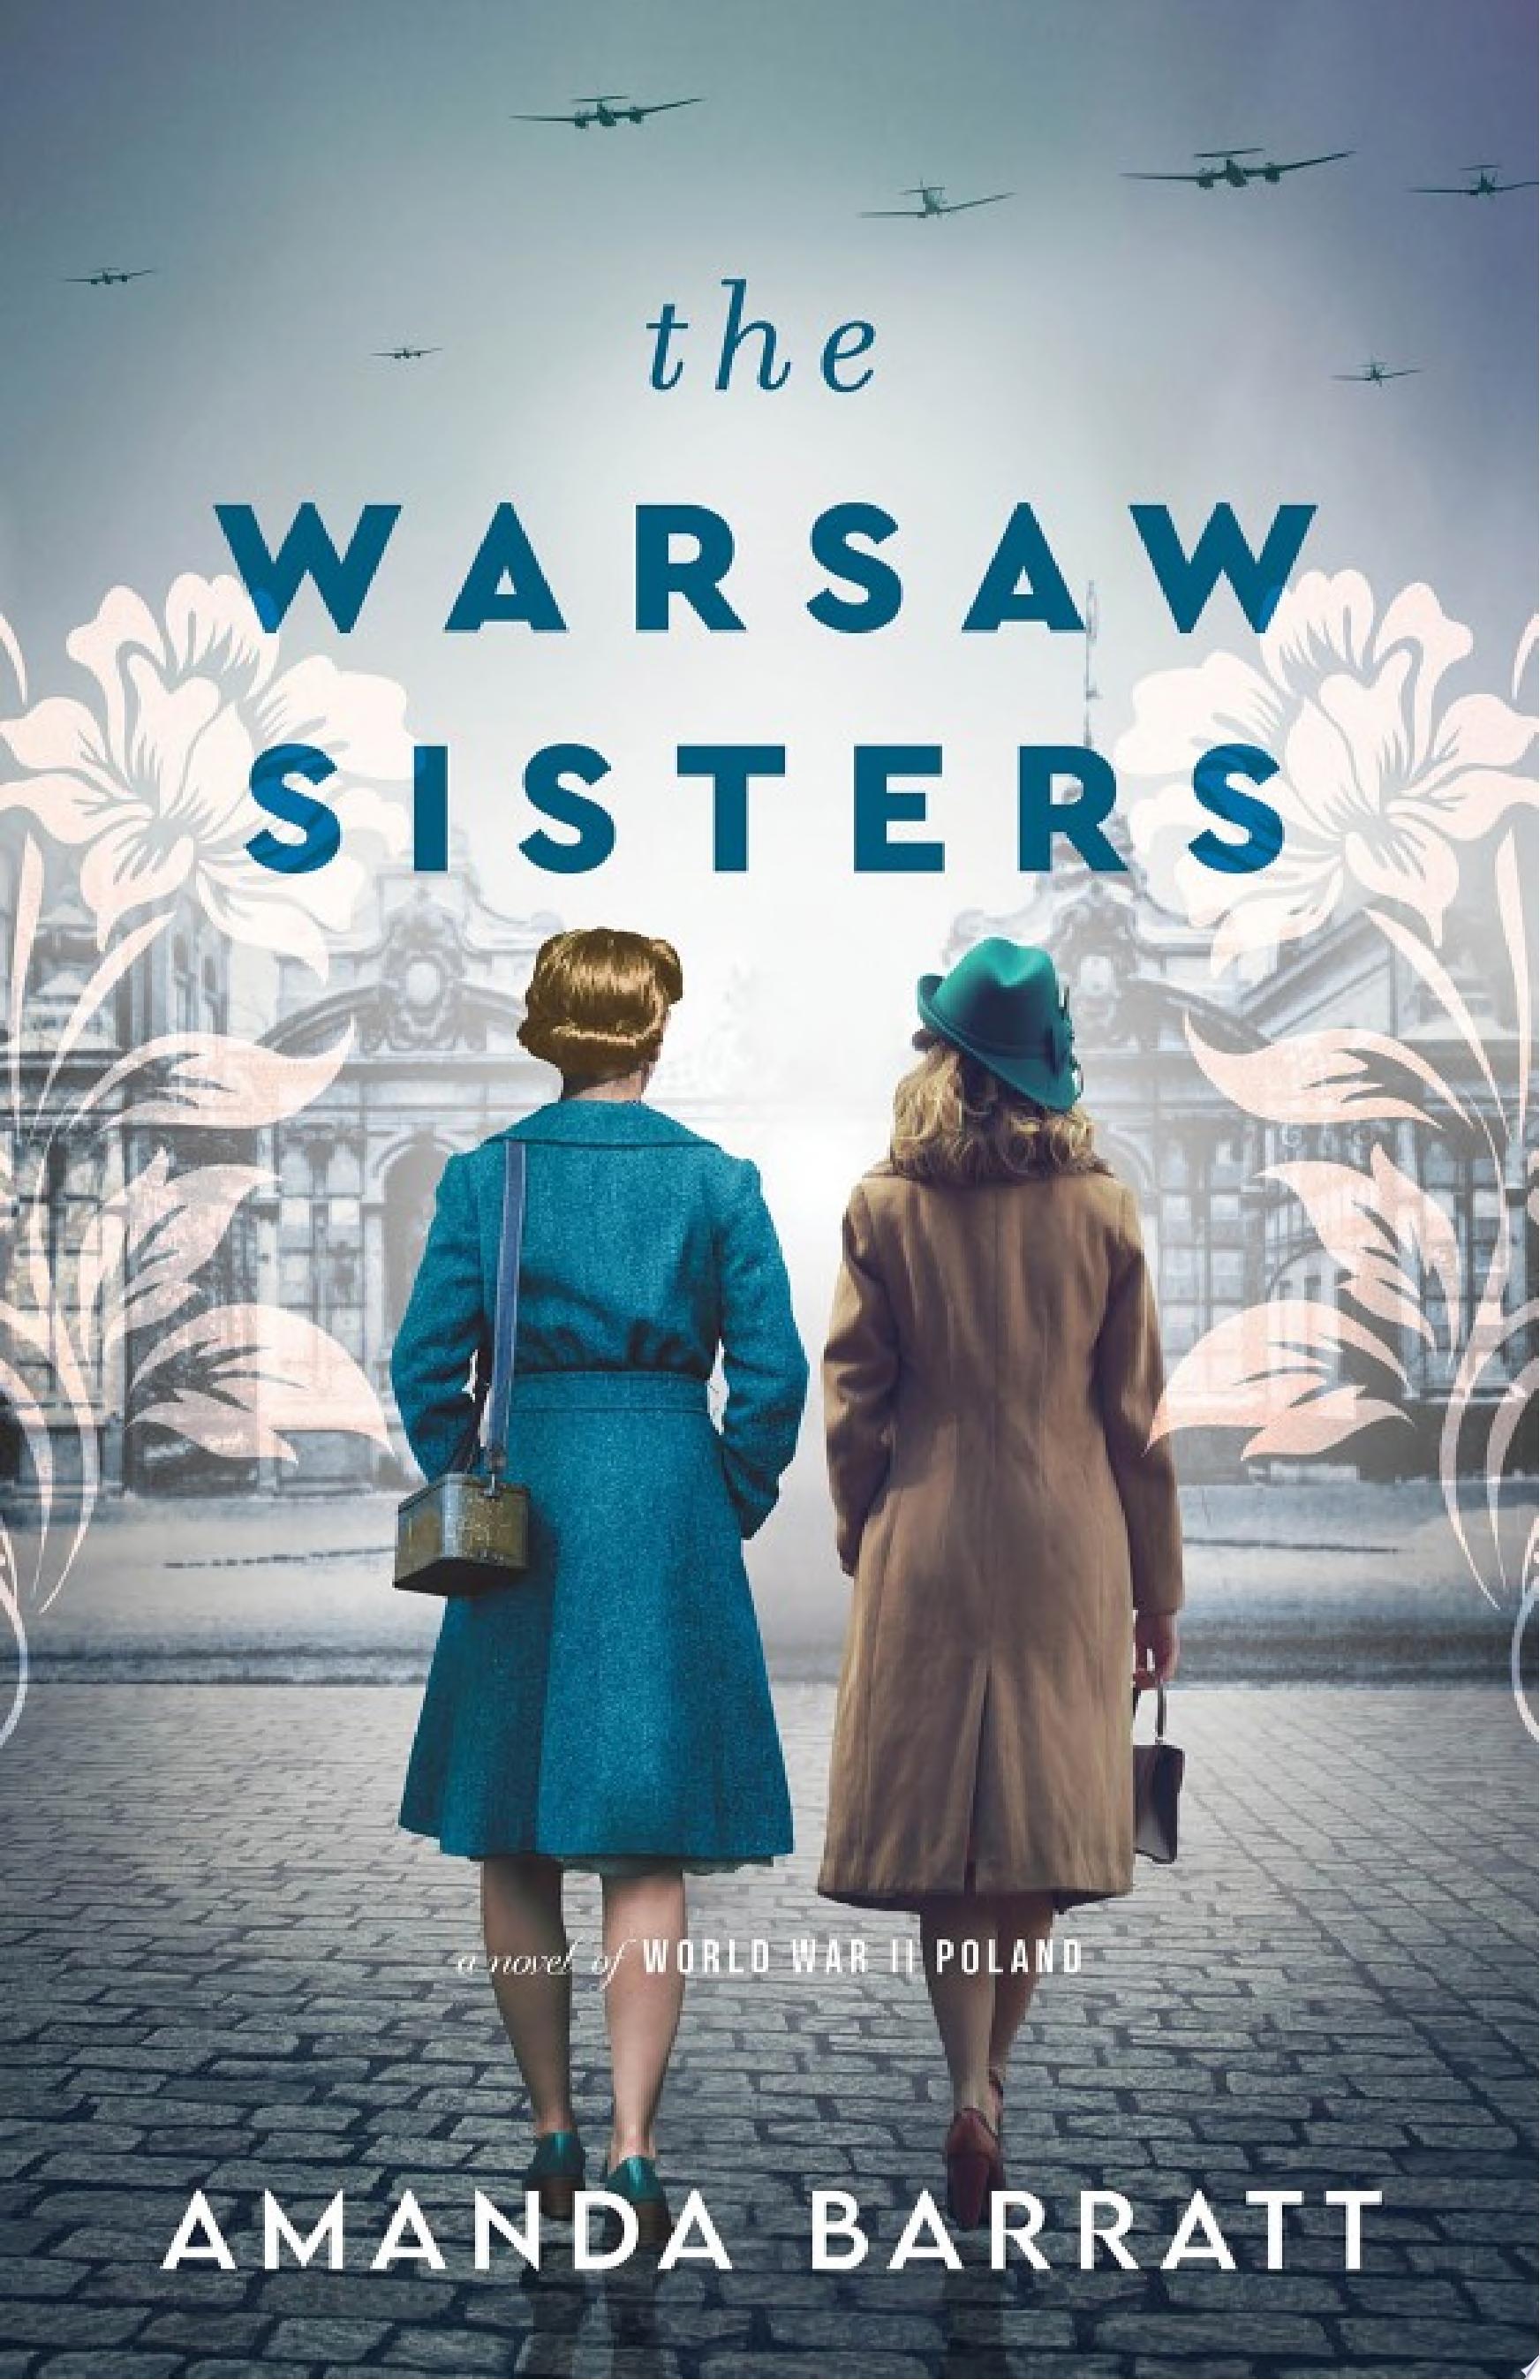 Image for "The Warsaw Sisters"